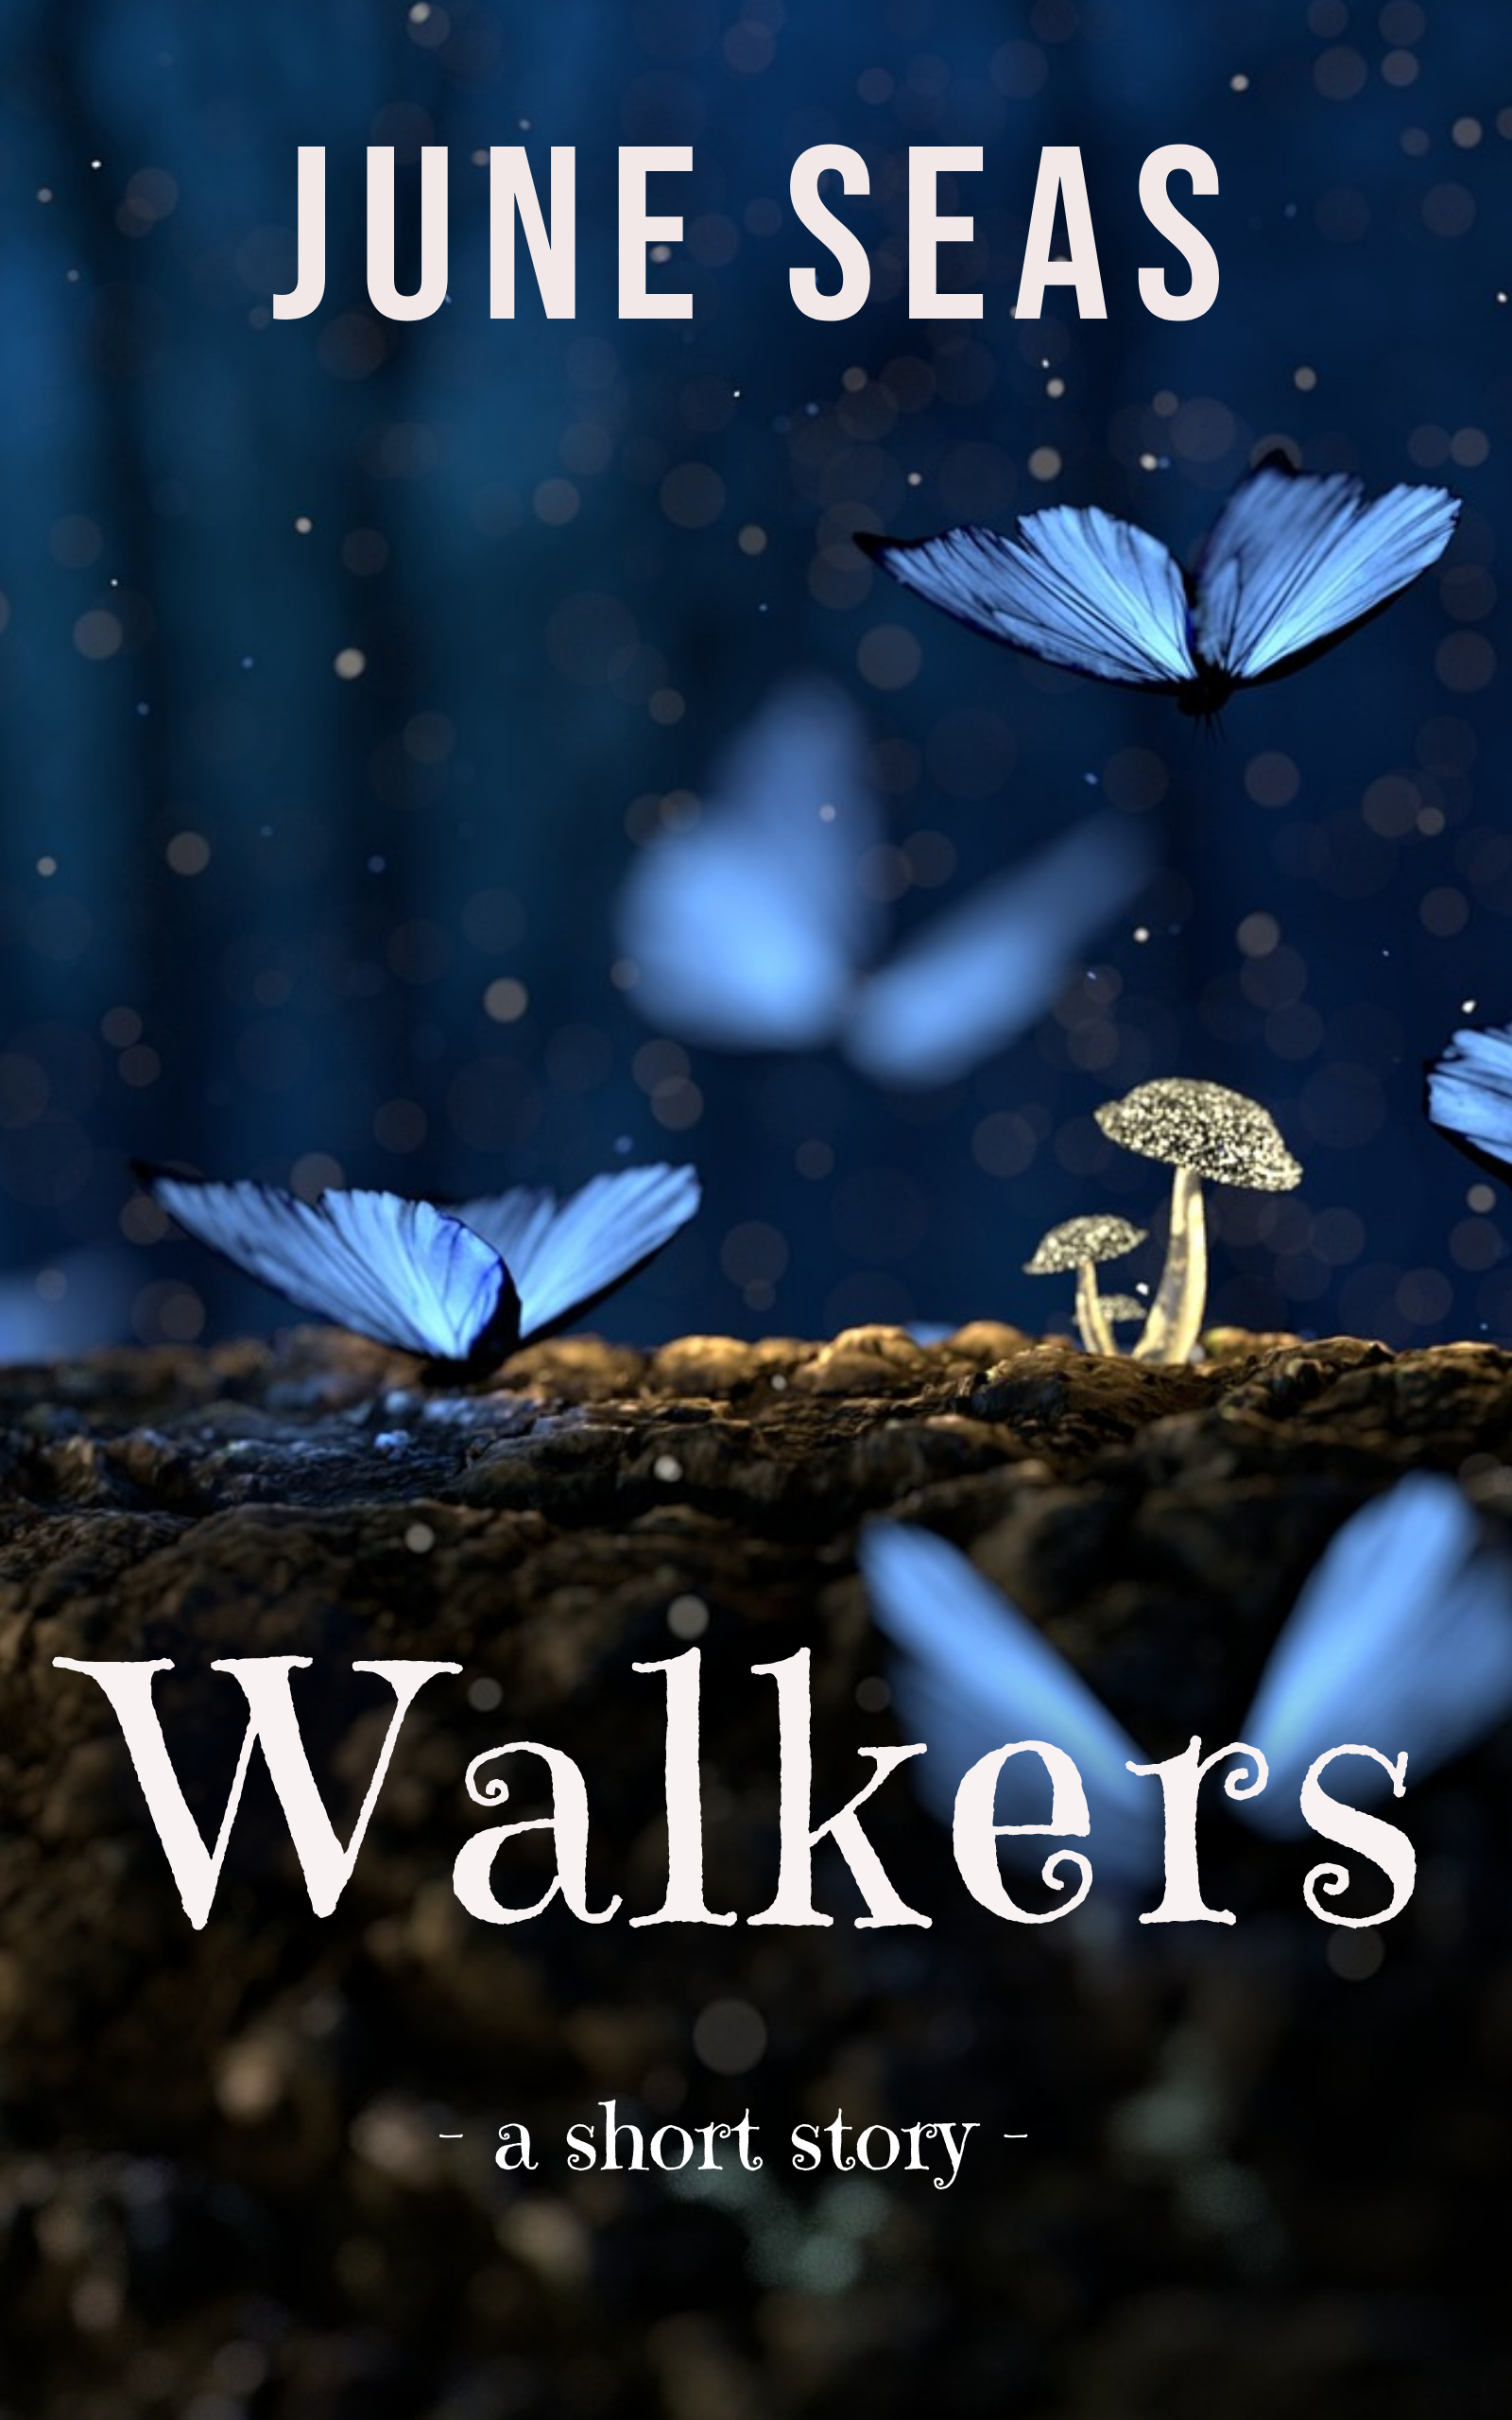 Blue butterflies alight on or take wing from a dark brown dirt and stones ground, with two white mushrooms springing from it, against the background of a dark blue night with rain or snow